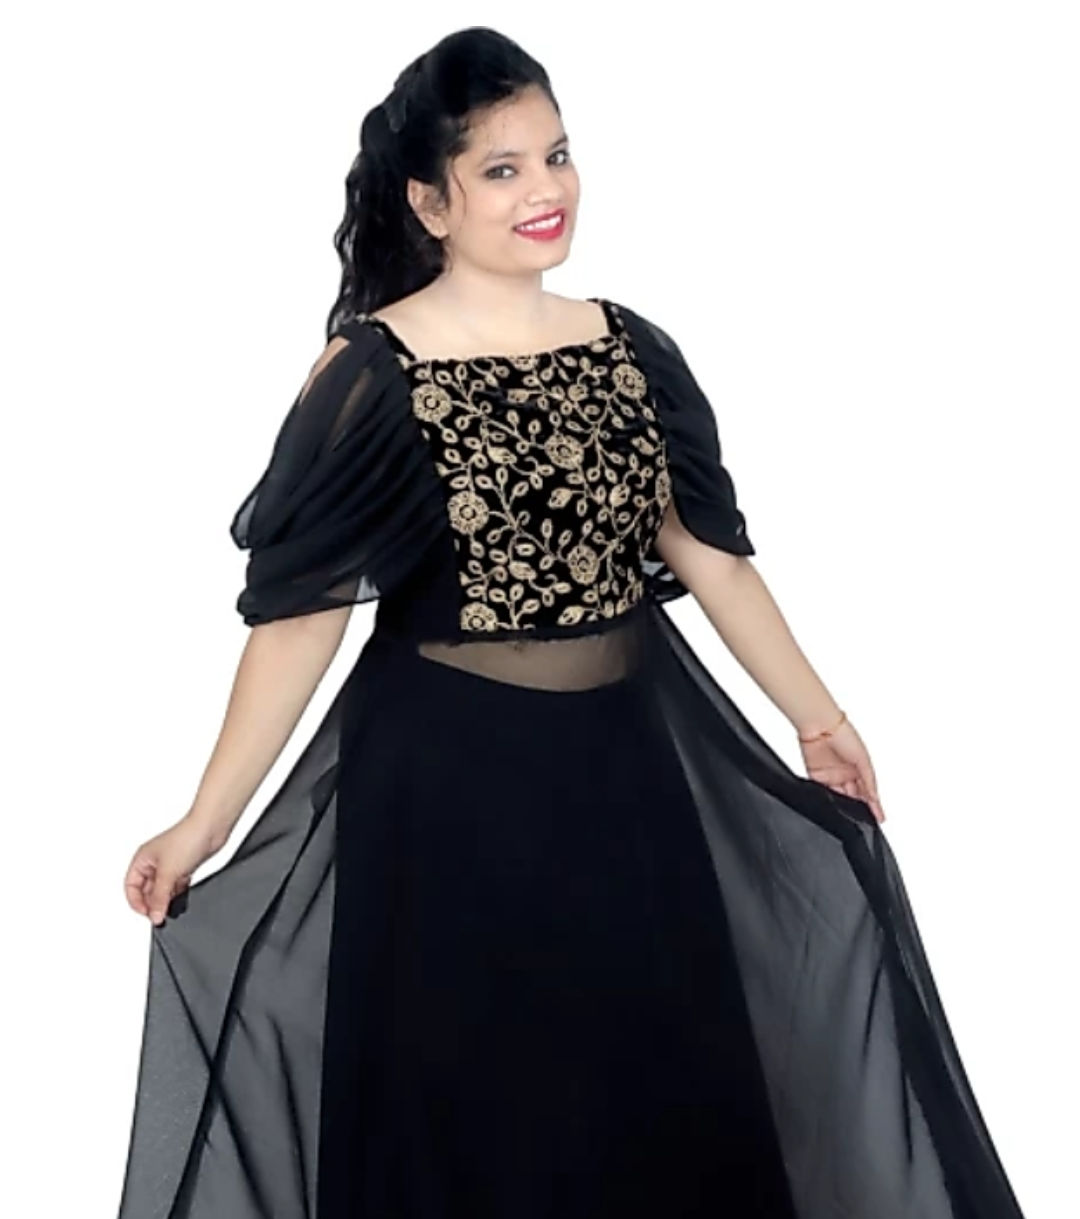 Presto fashion Women Ethnic Top and Skirt Set - Buy Presto fashion Women Ethnic Top and Skirt Set Online at Best Prices in India | Flipkart.com